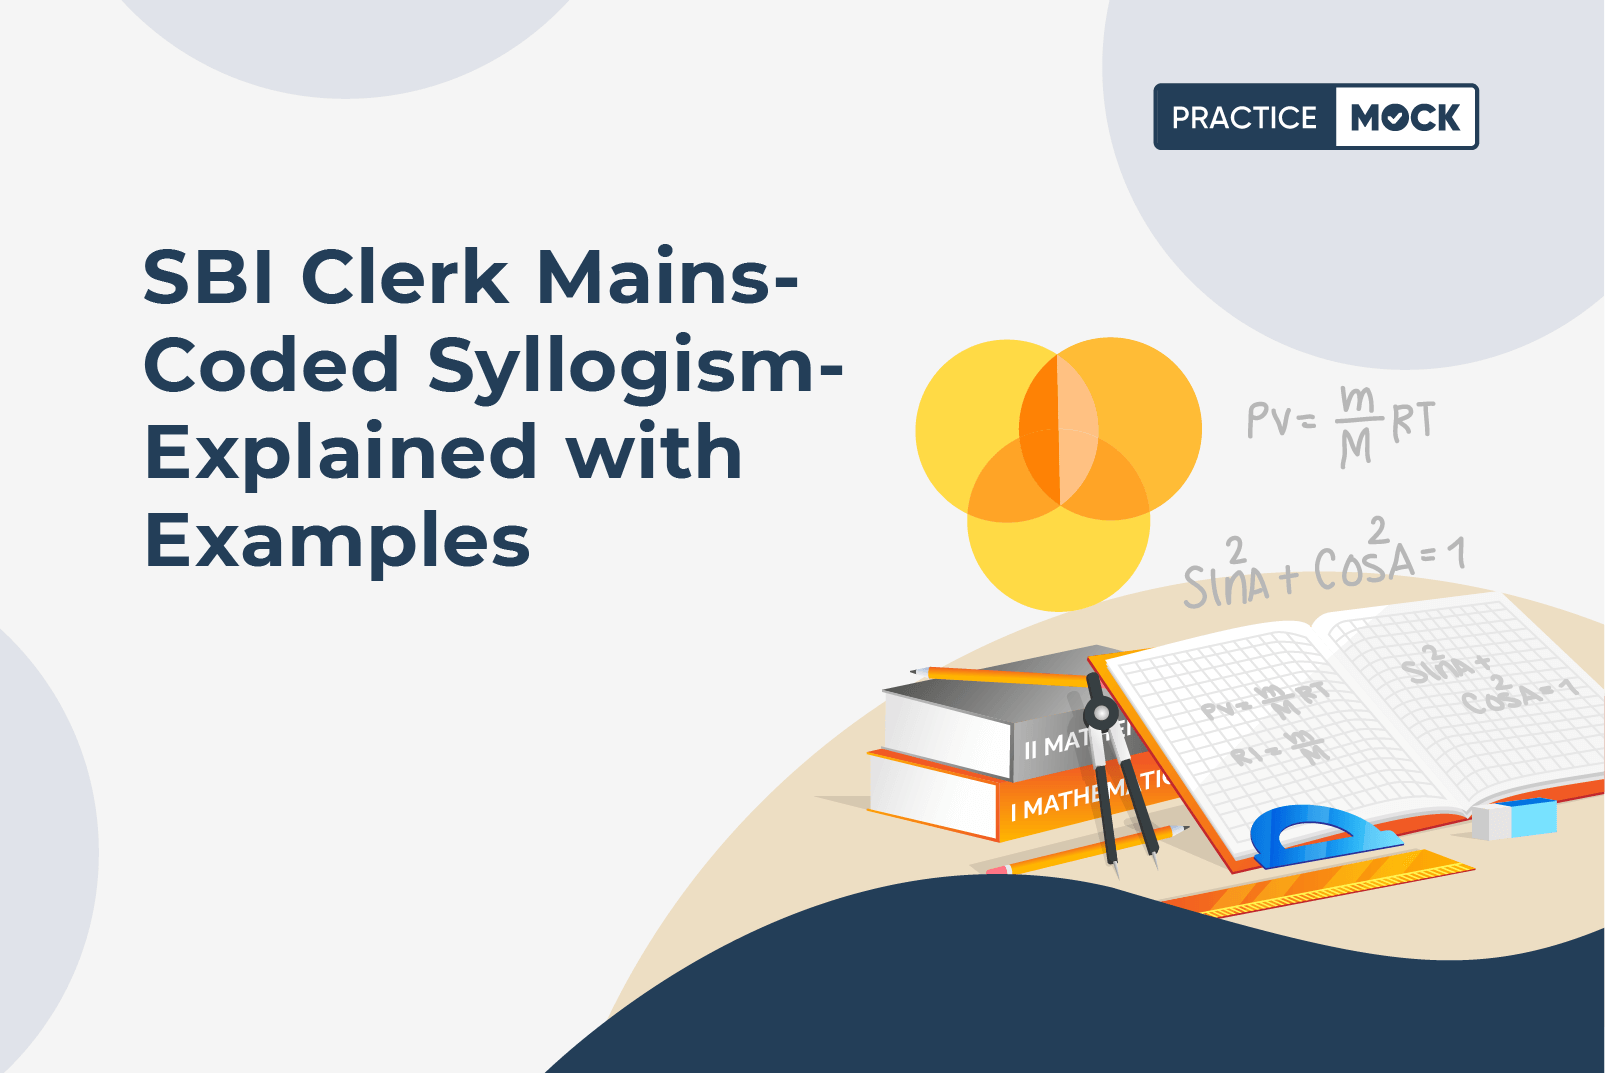 SBI Clerk Mains- Coded Syllogism- Explained with Examples